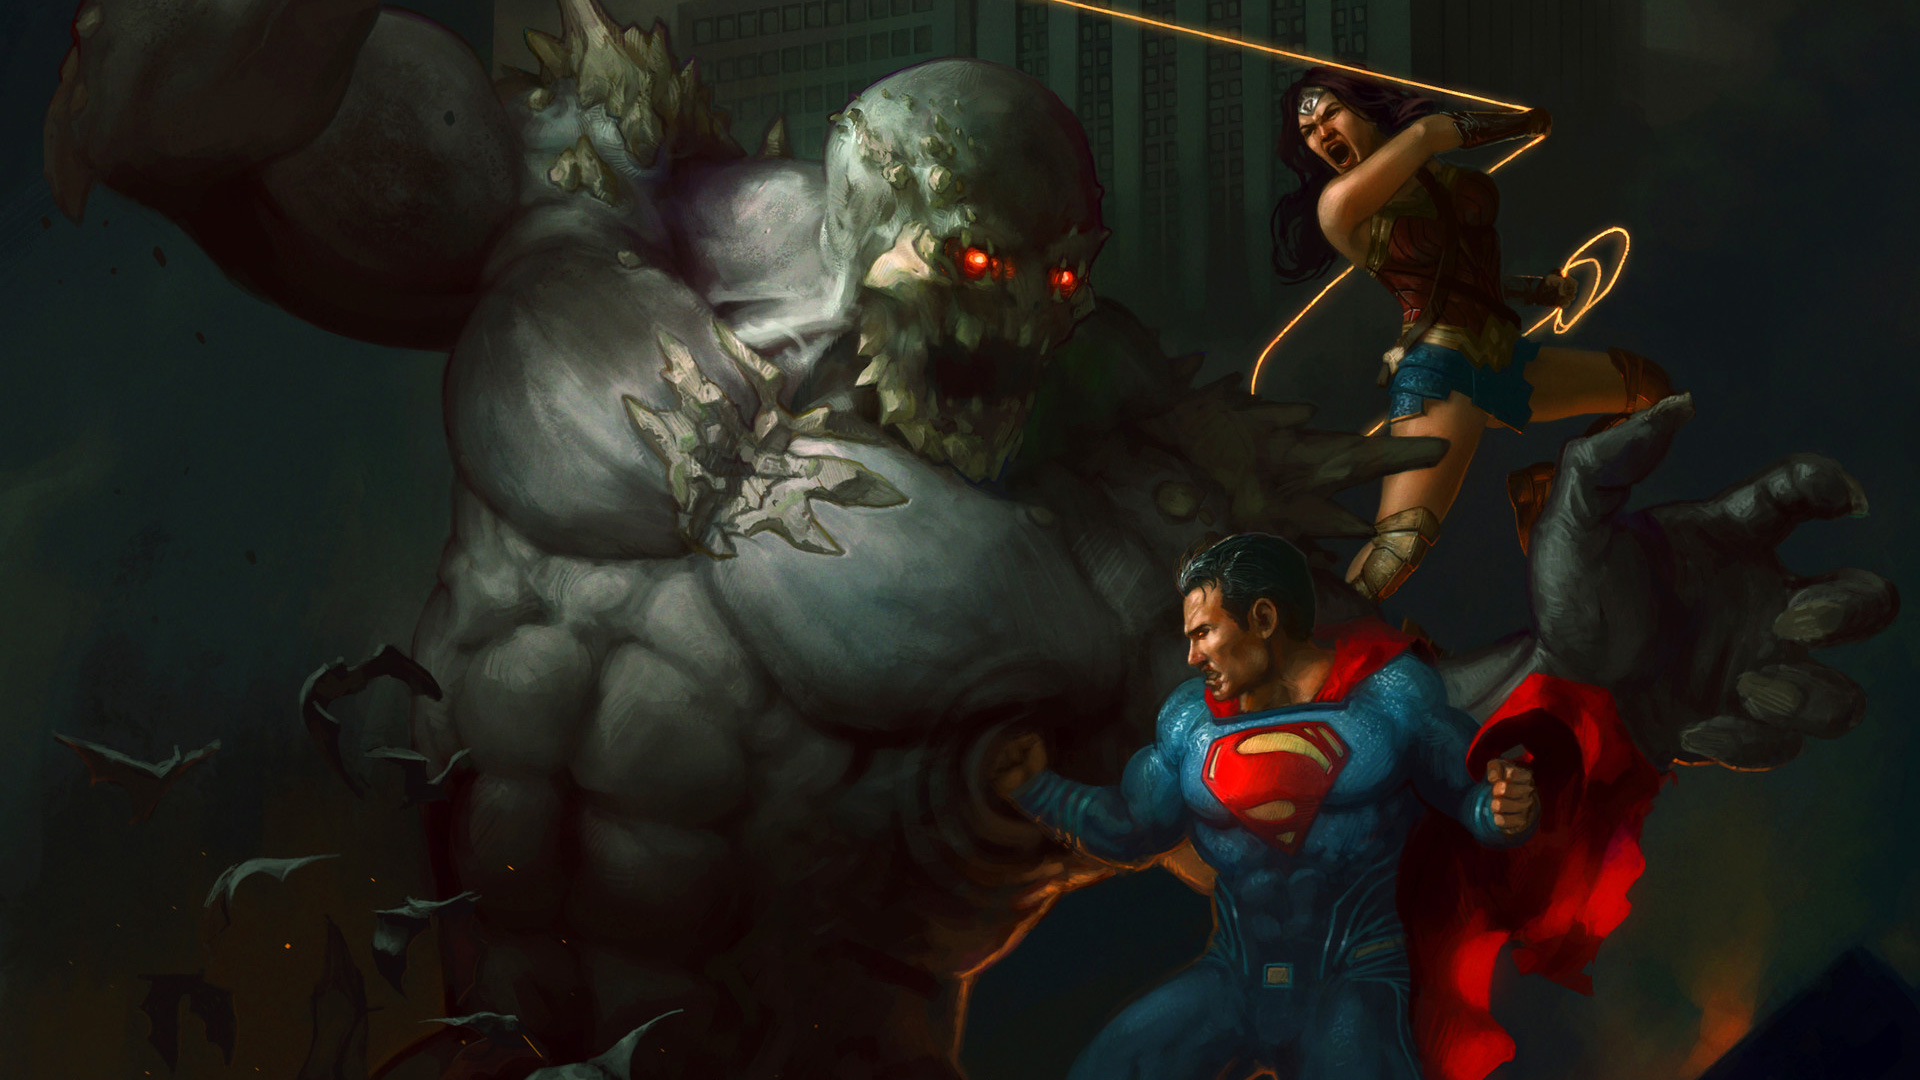 The Trinity Vs Doomsday Art Laptop Full HD 1080P HD 4k Wallpaper, Image, Background, Photo and Picture